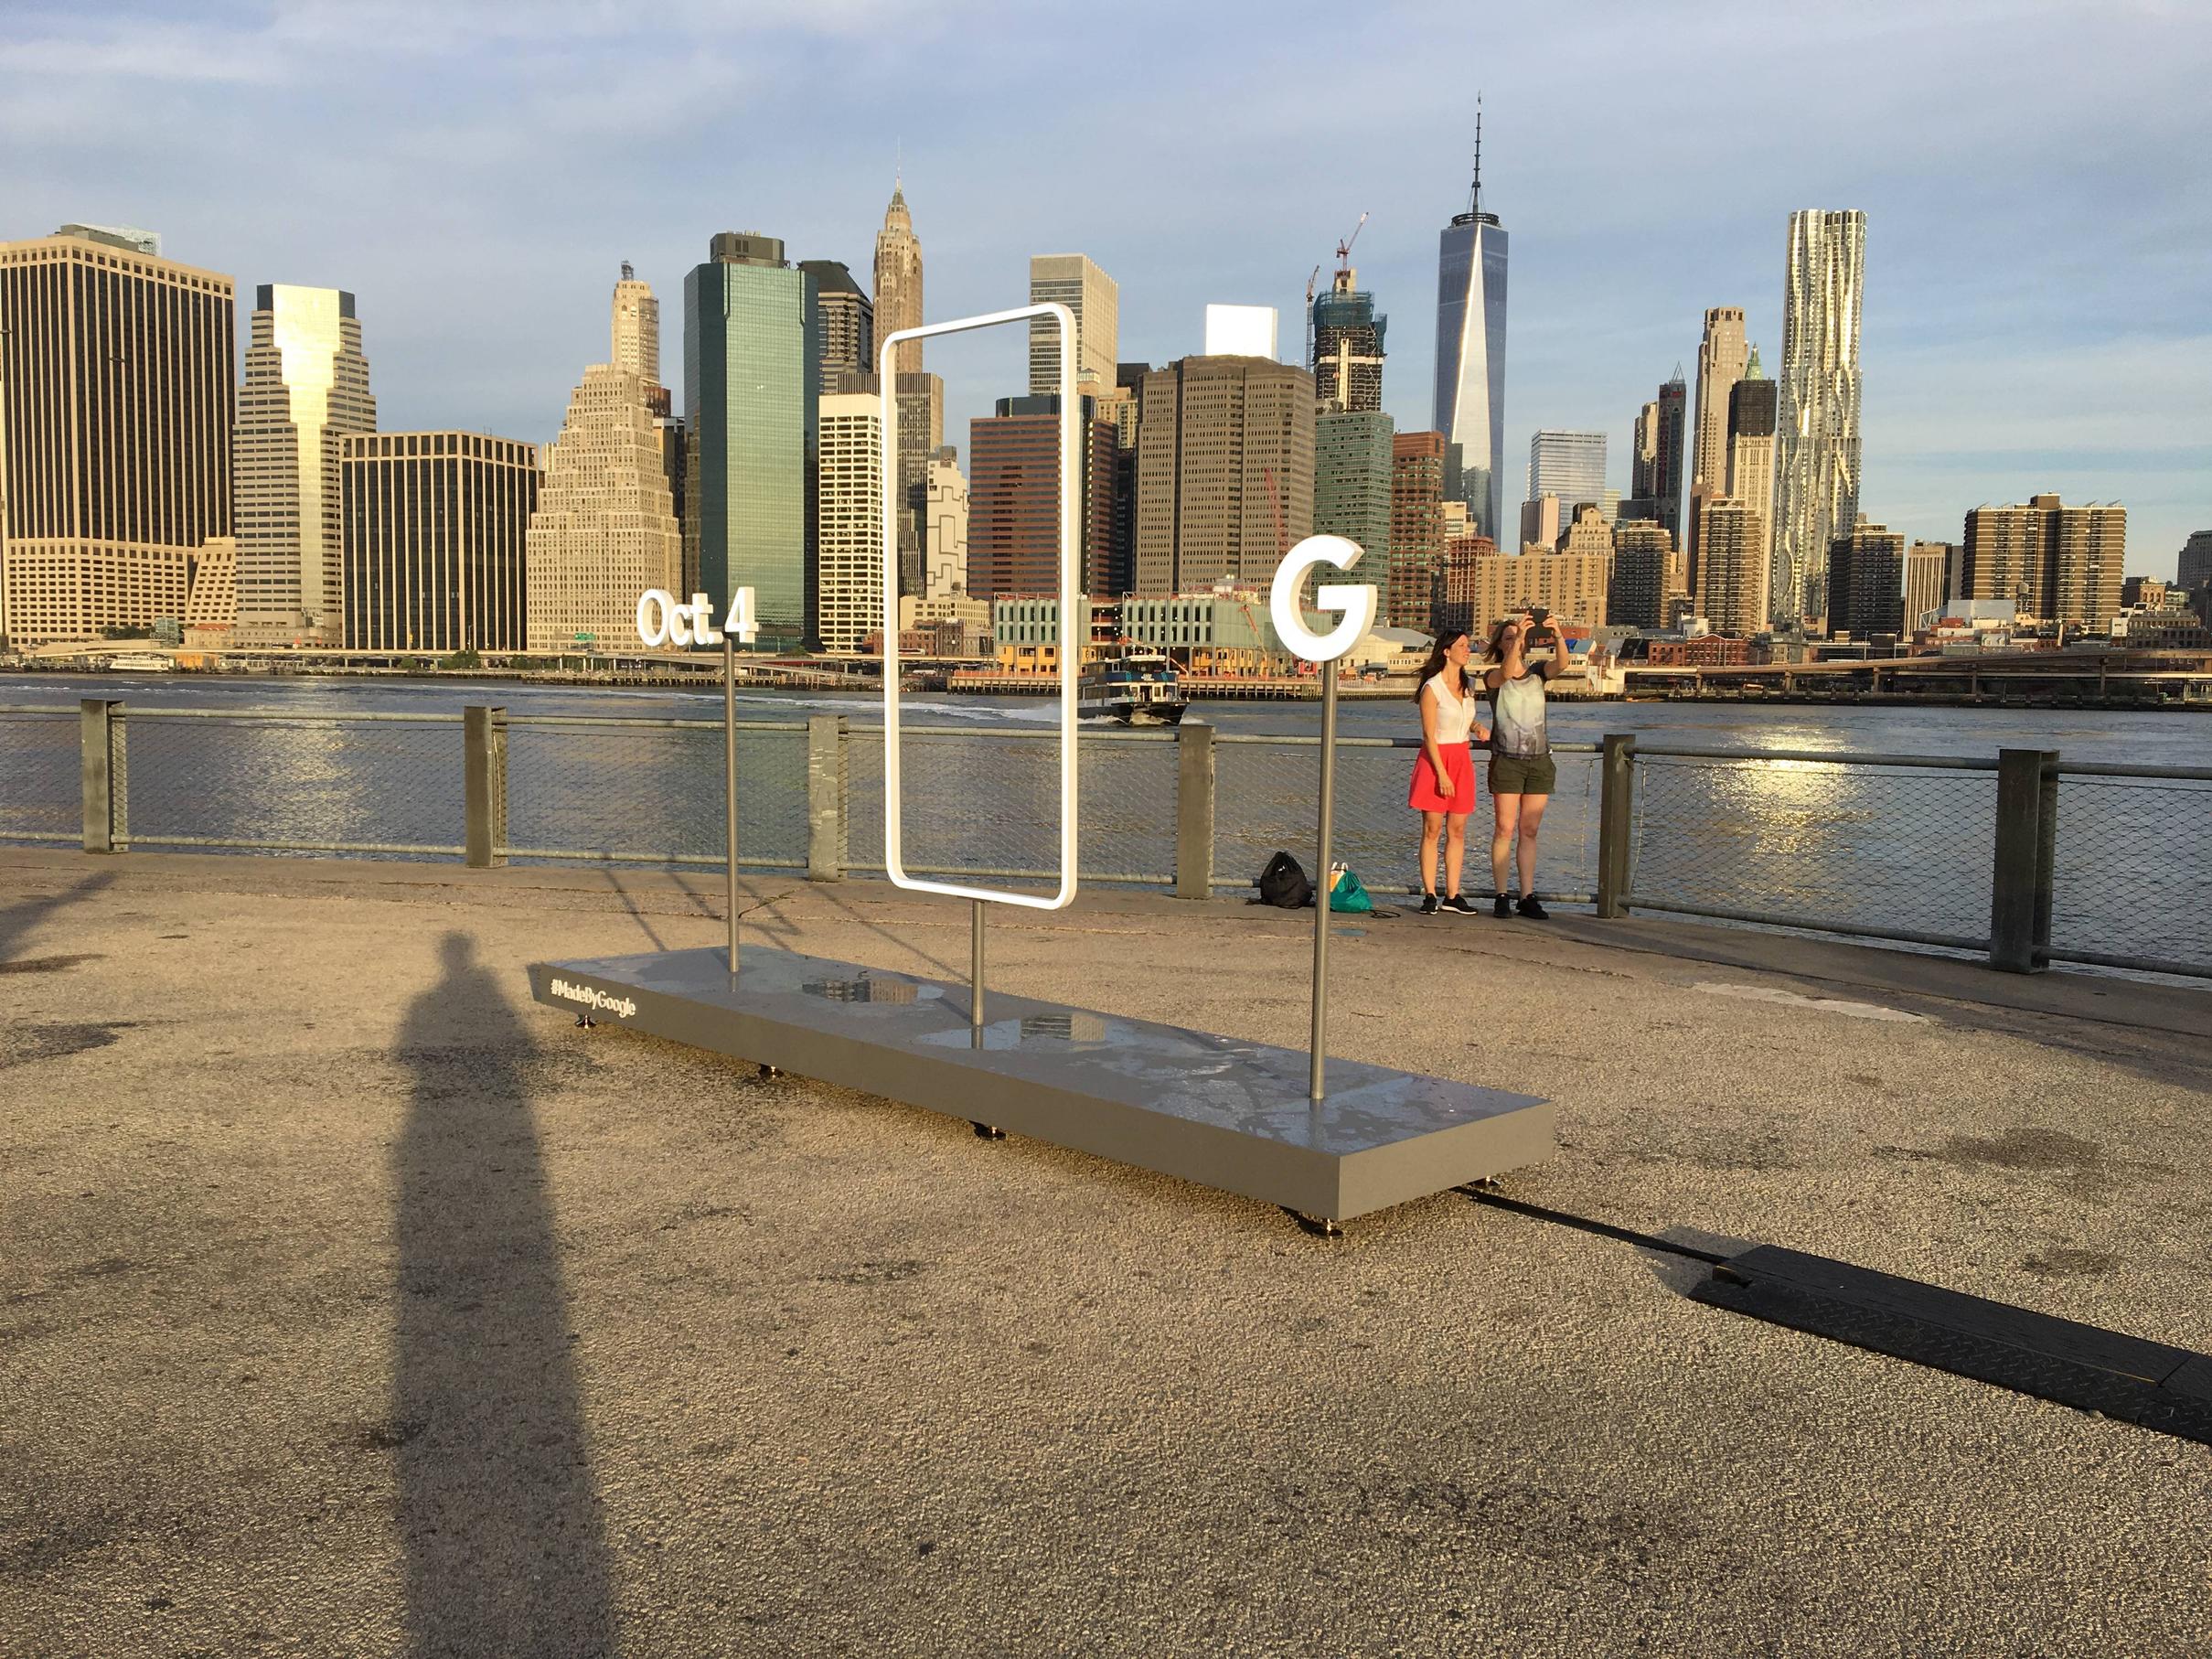 The Pixel sculpture in Brooklyn - What to expect from Google's October 4 event: Pixel & Pixel XL phones, Andromeda OS, new Nexus tablet